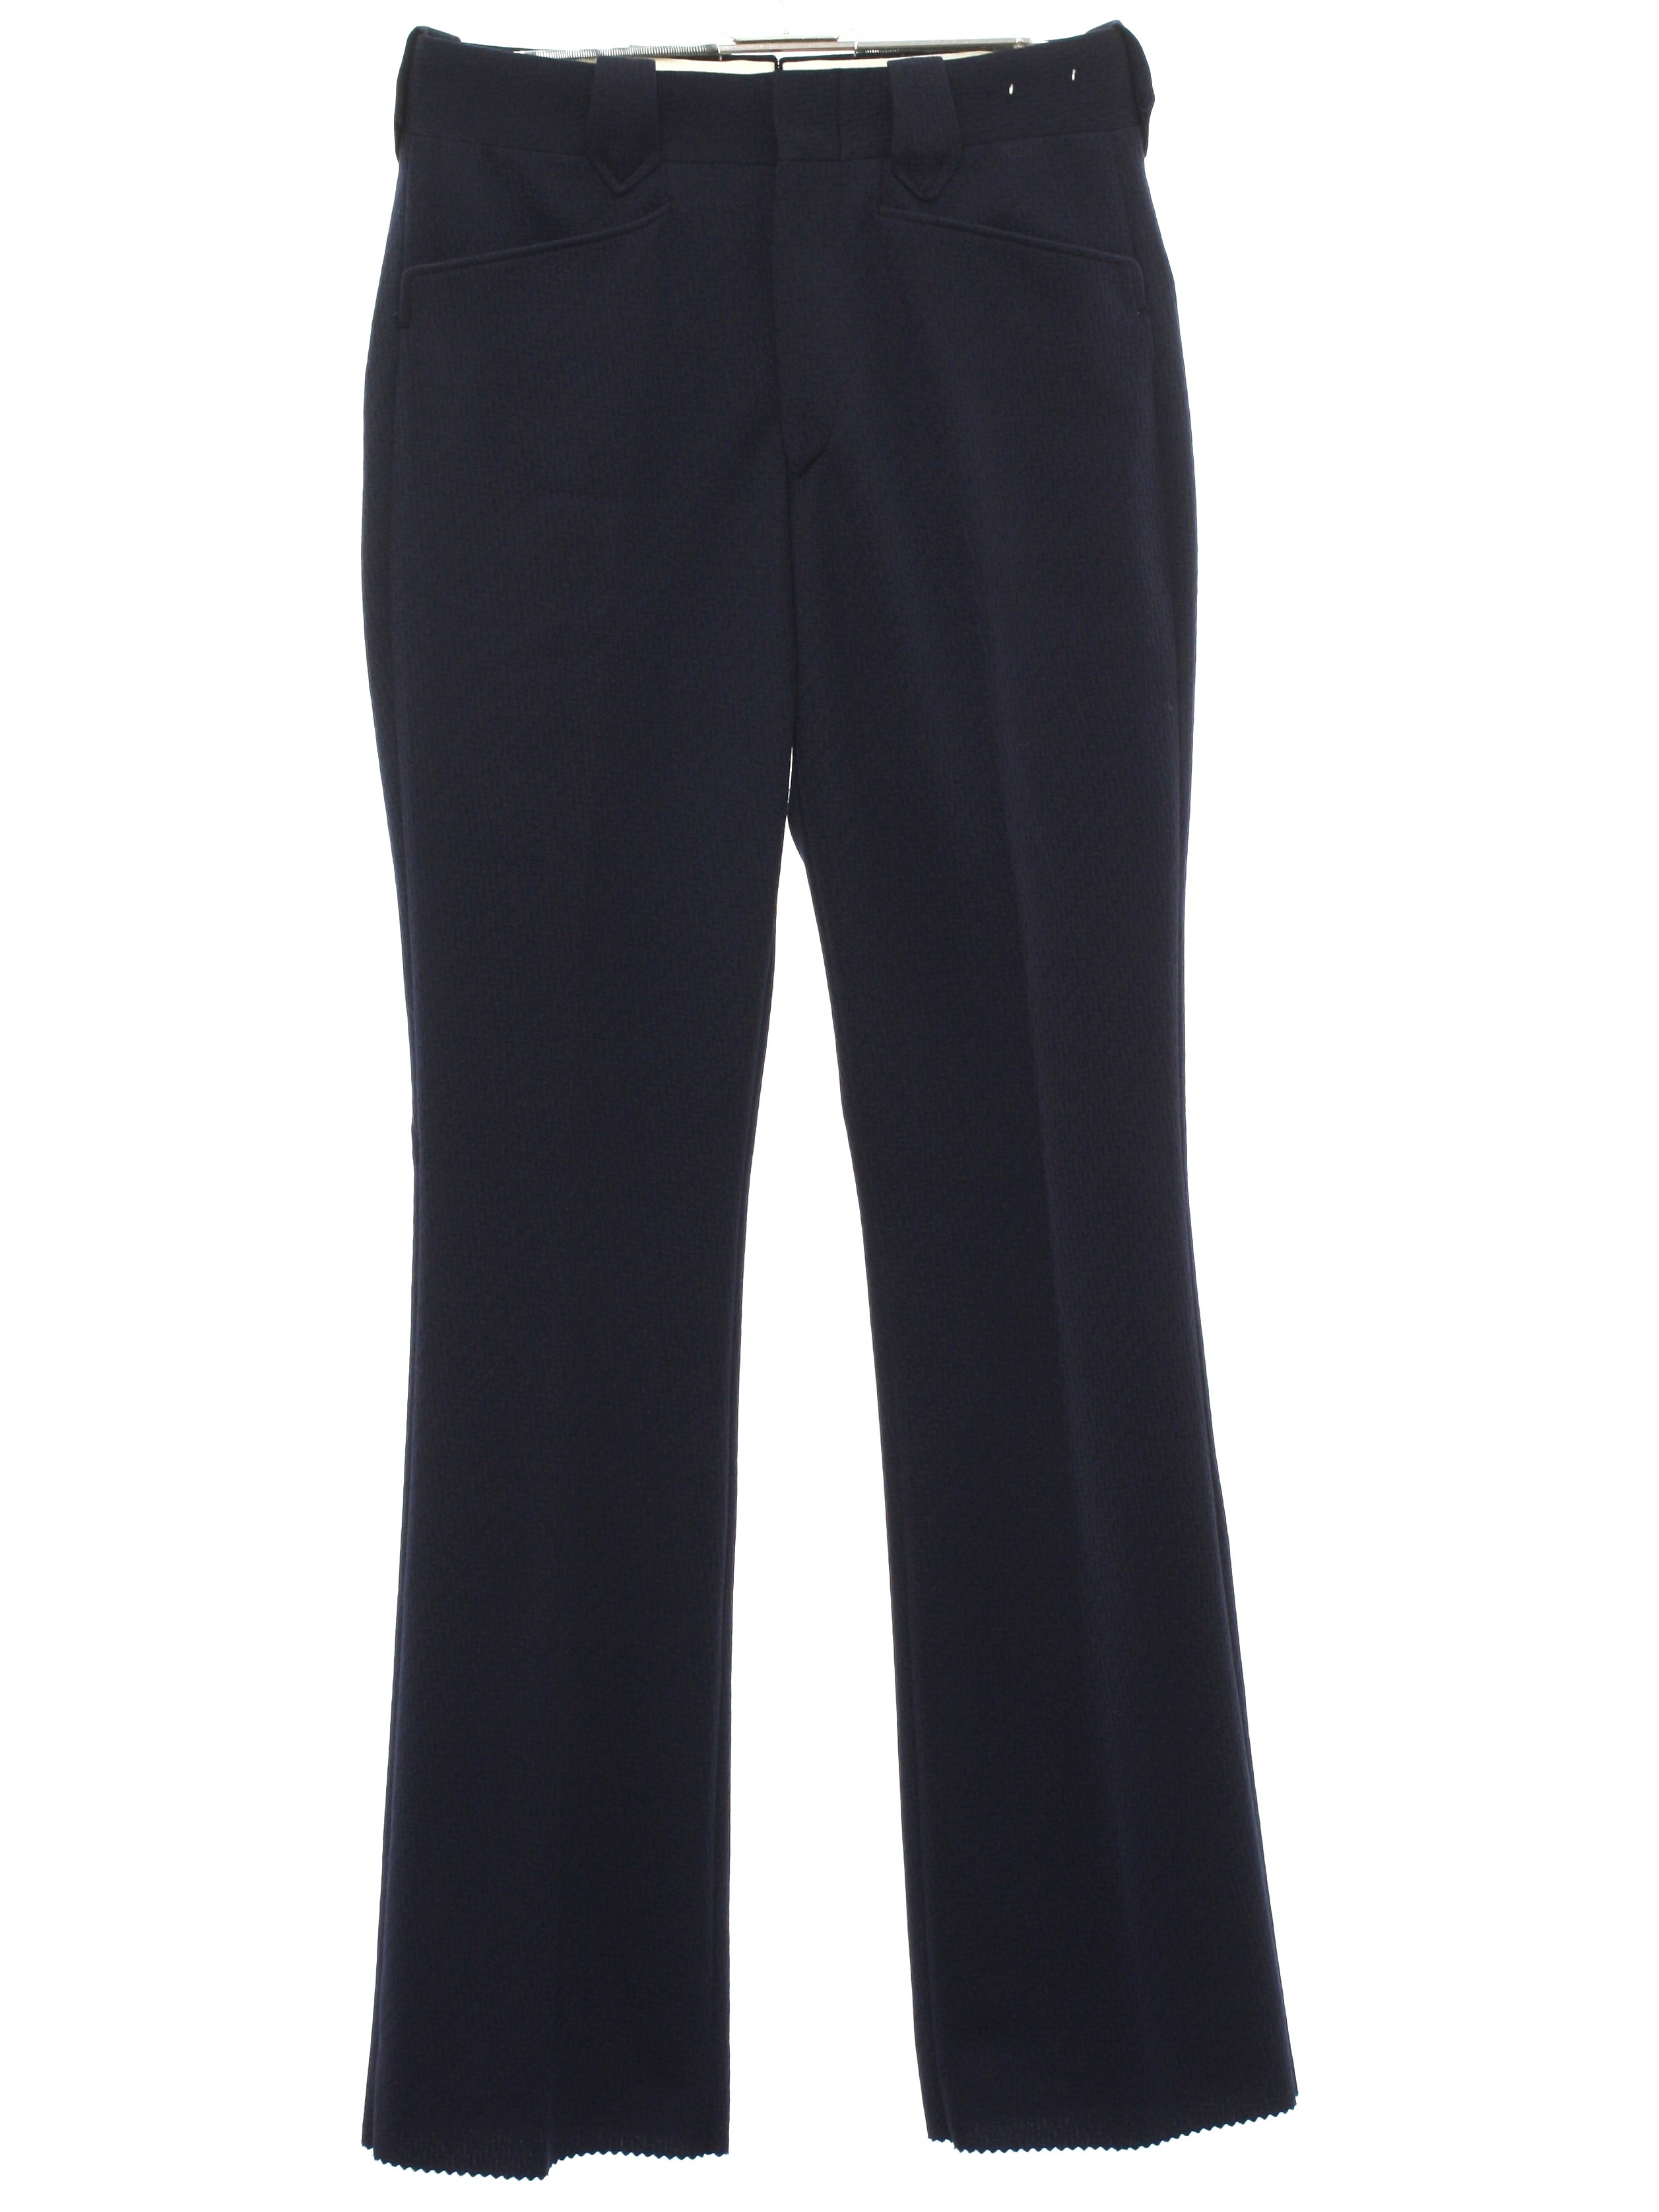 70's Flared Pants / Flares: 70s -No Label- Mens midnight blue polyester ...